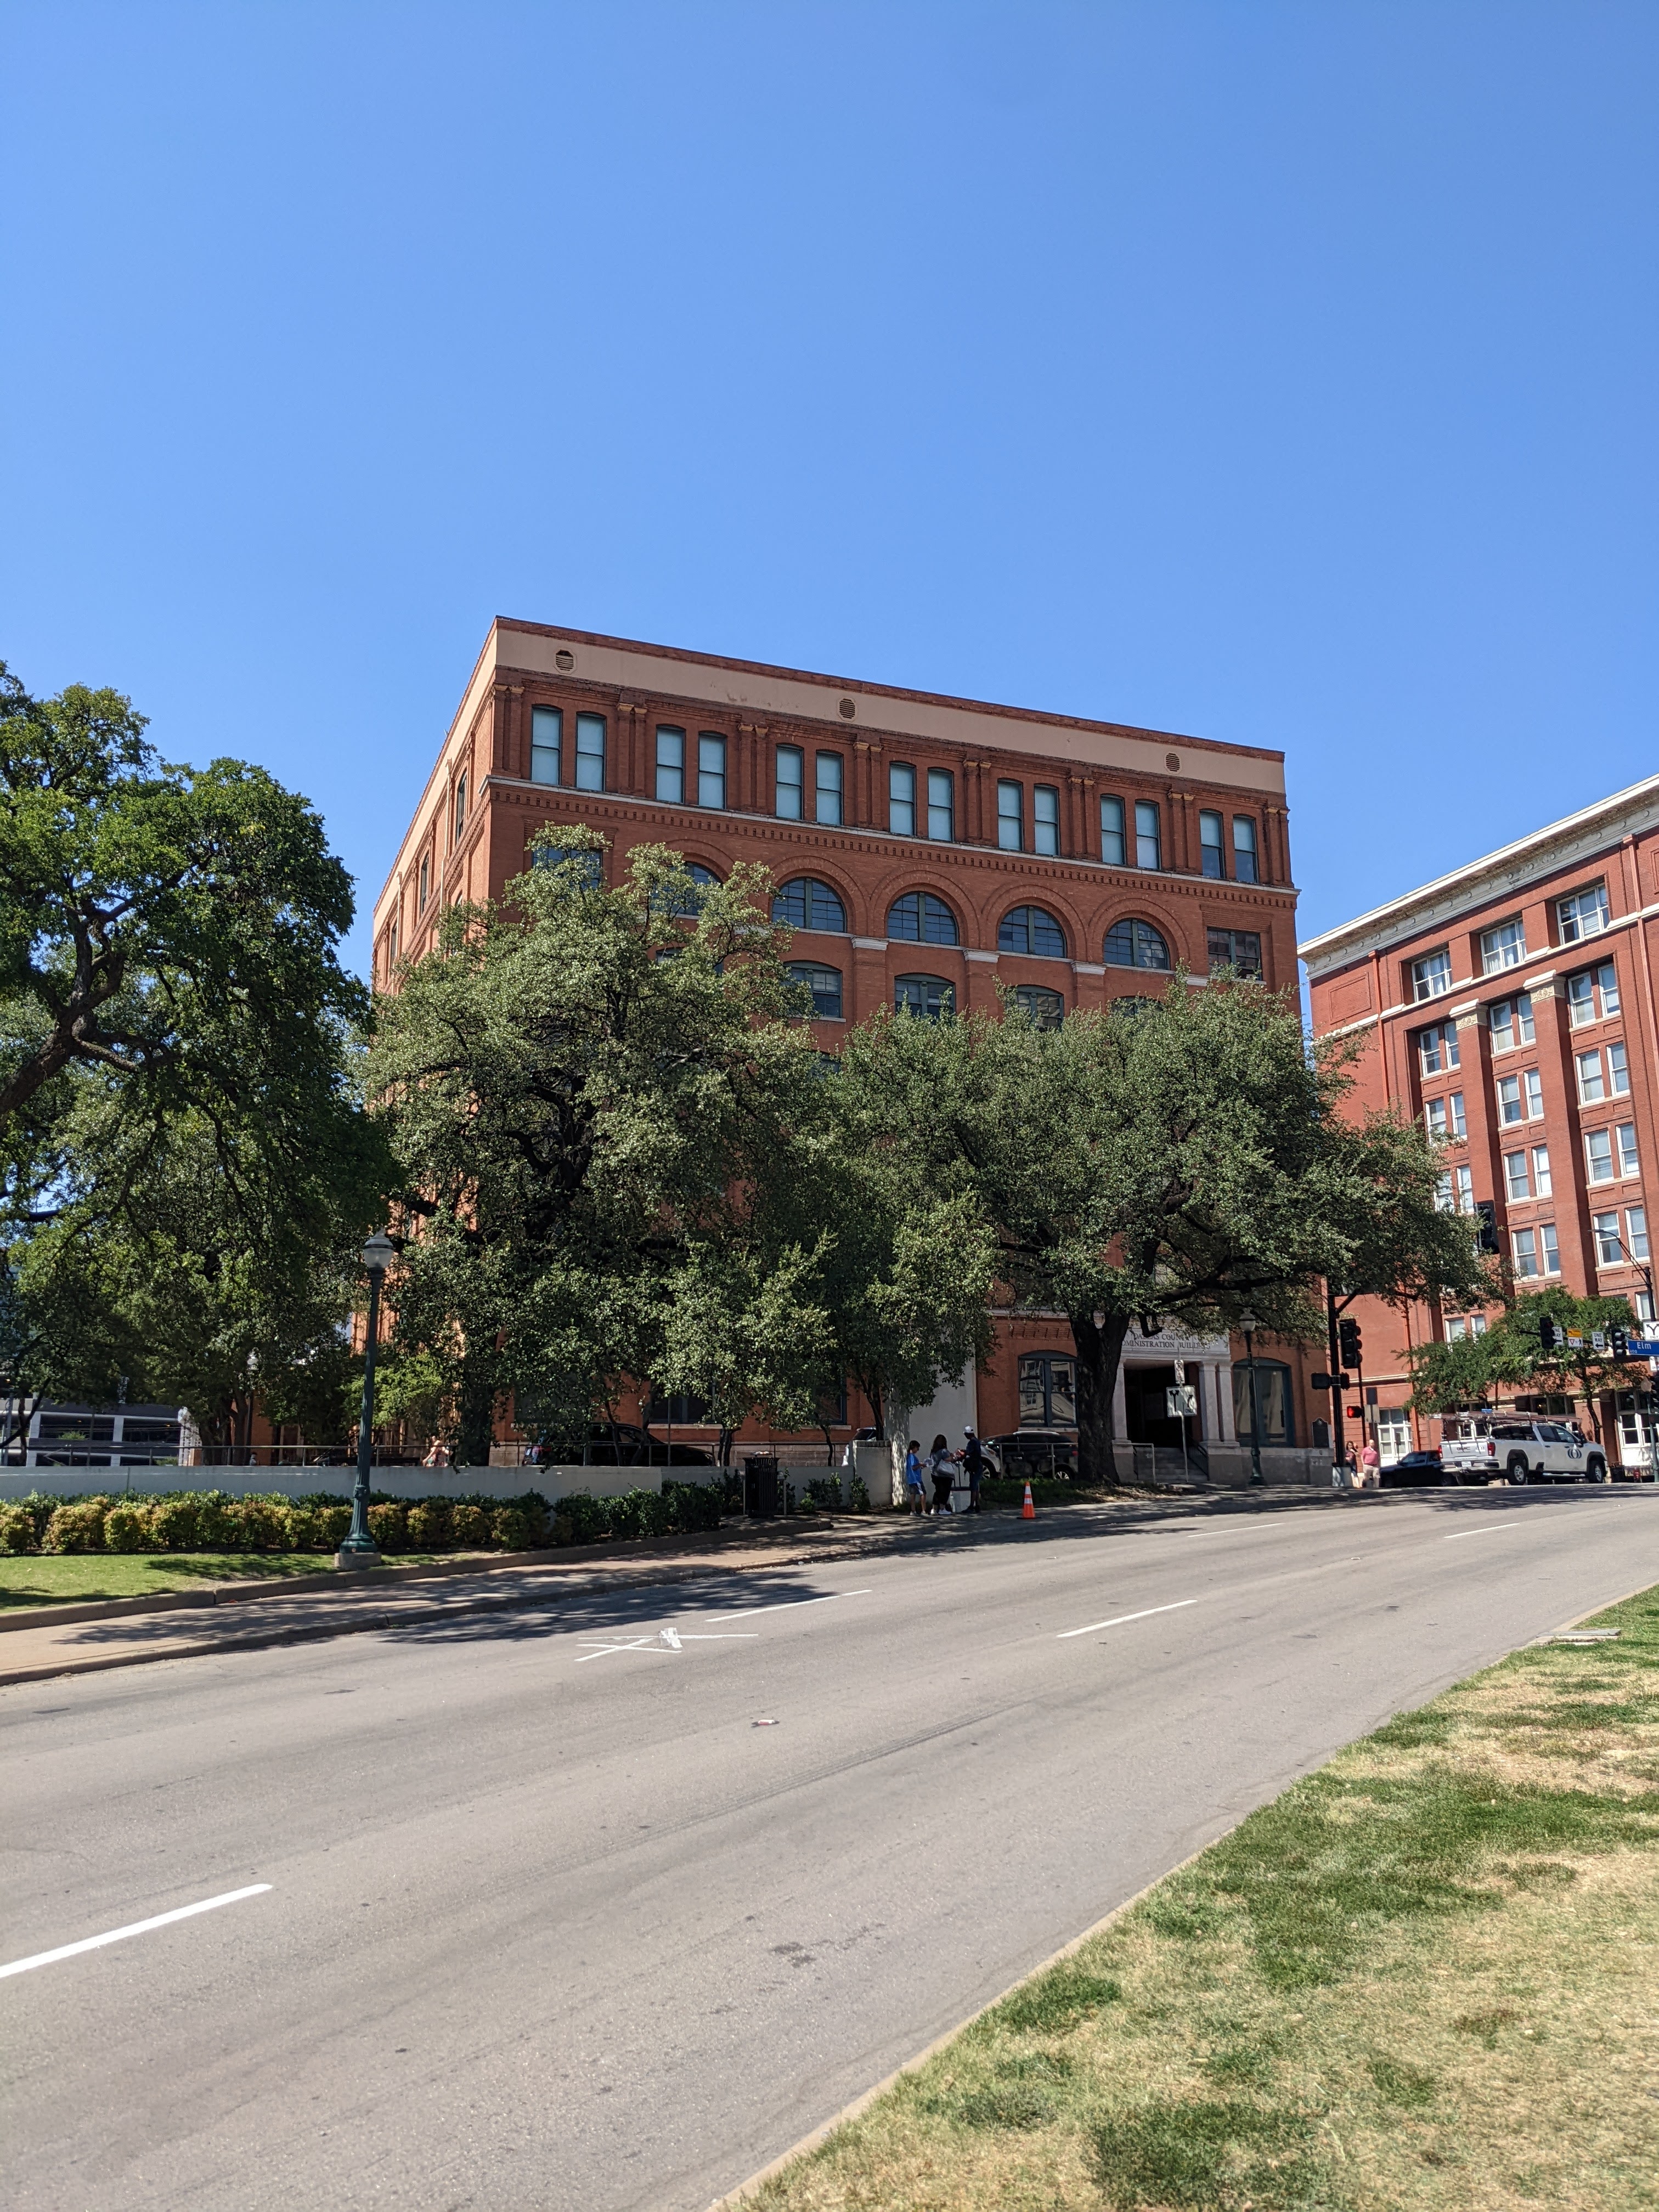 Former Texas School Book Depository Building and Elm Street, with an X marking the site of JFK's assassination